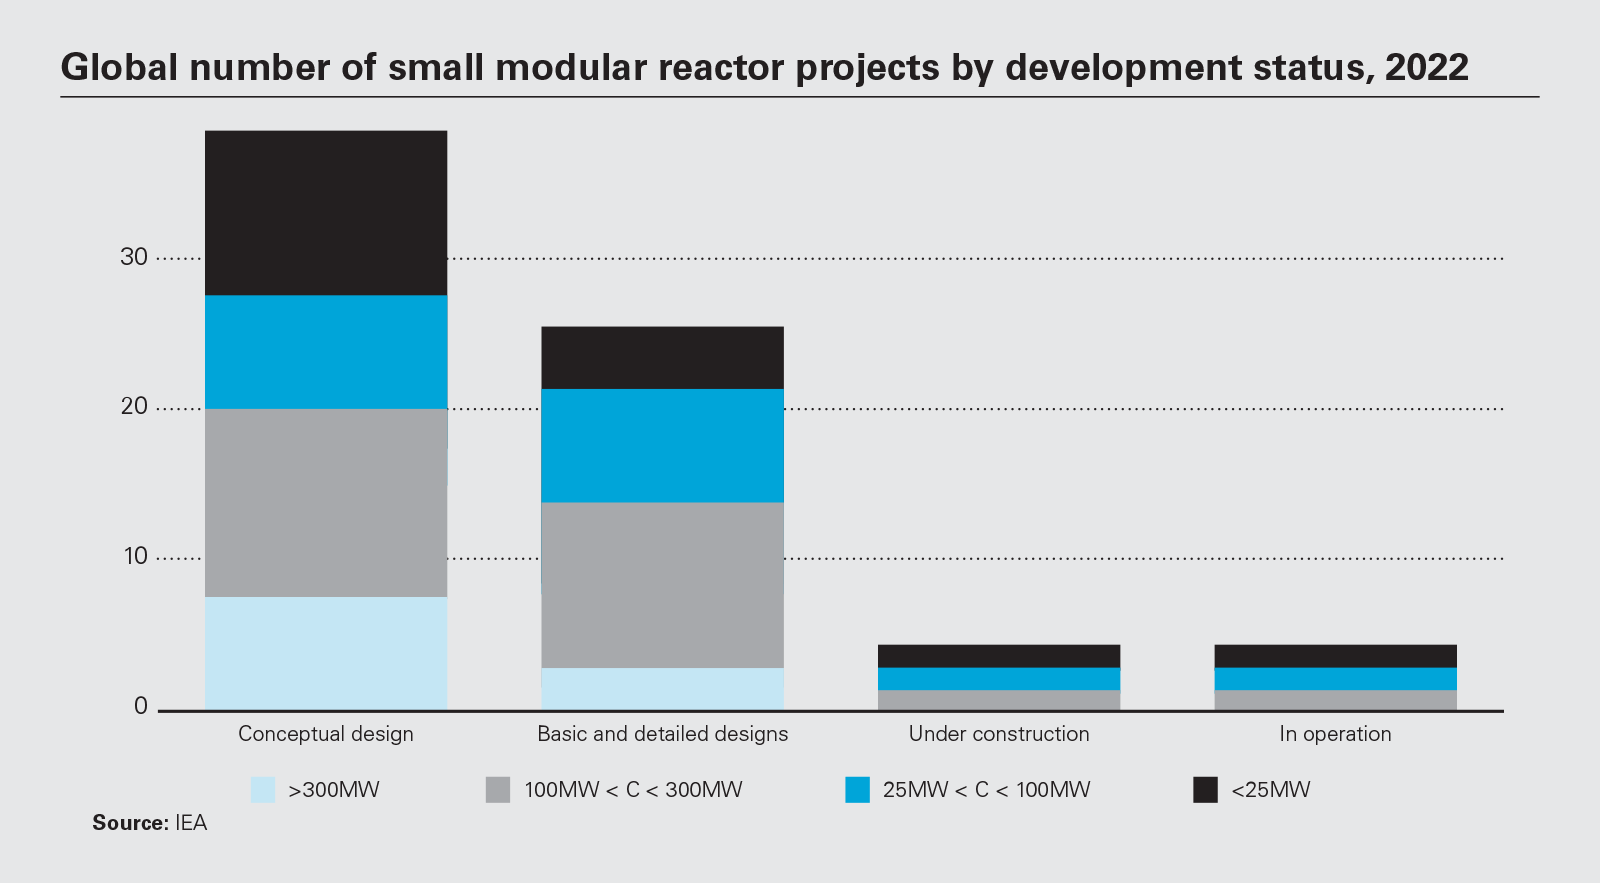 Global number of small modular reactor projects by development status, 2022 (PDF)